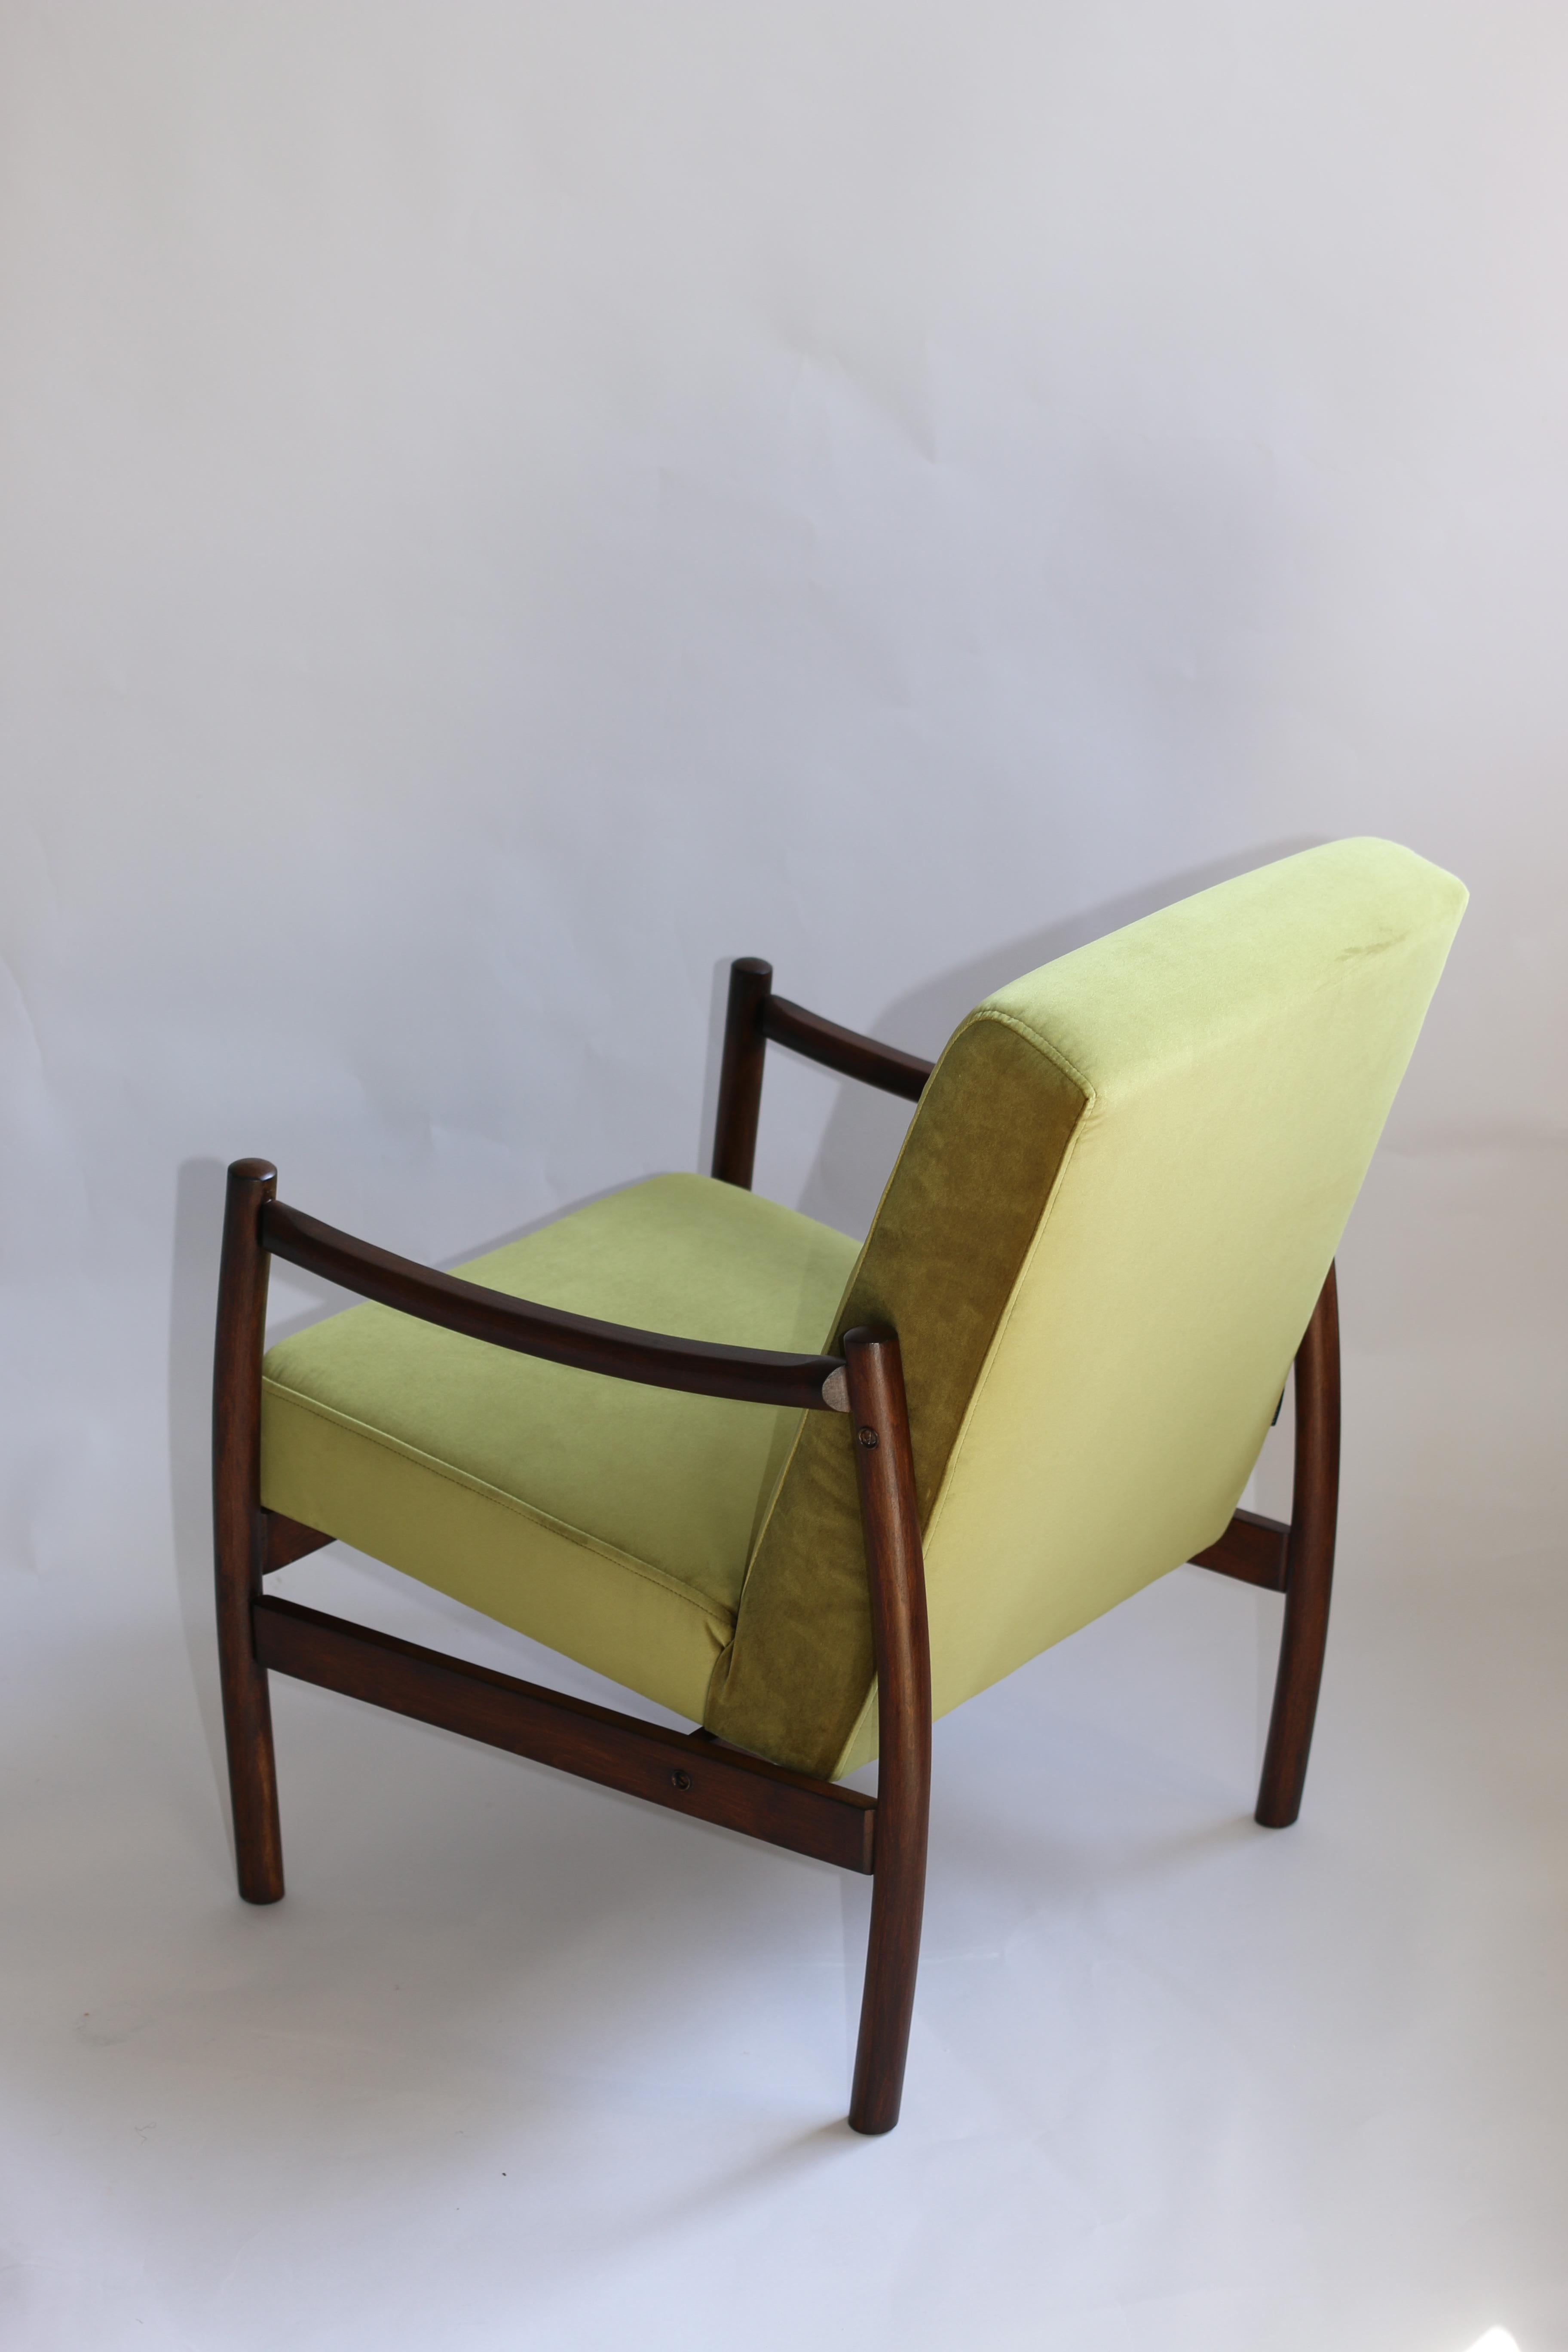 Restored polish armchairs in green velvet from 1970s, new upholstery covered with velvet fabric in fashionable green color, finished with wooden chair cushion. Wooden elements in dark oak color. Perfect condition. 

Dimension H 80 x W 58 x D 59.